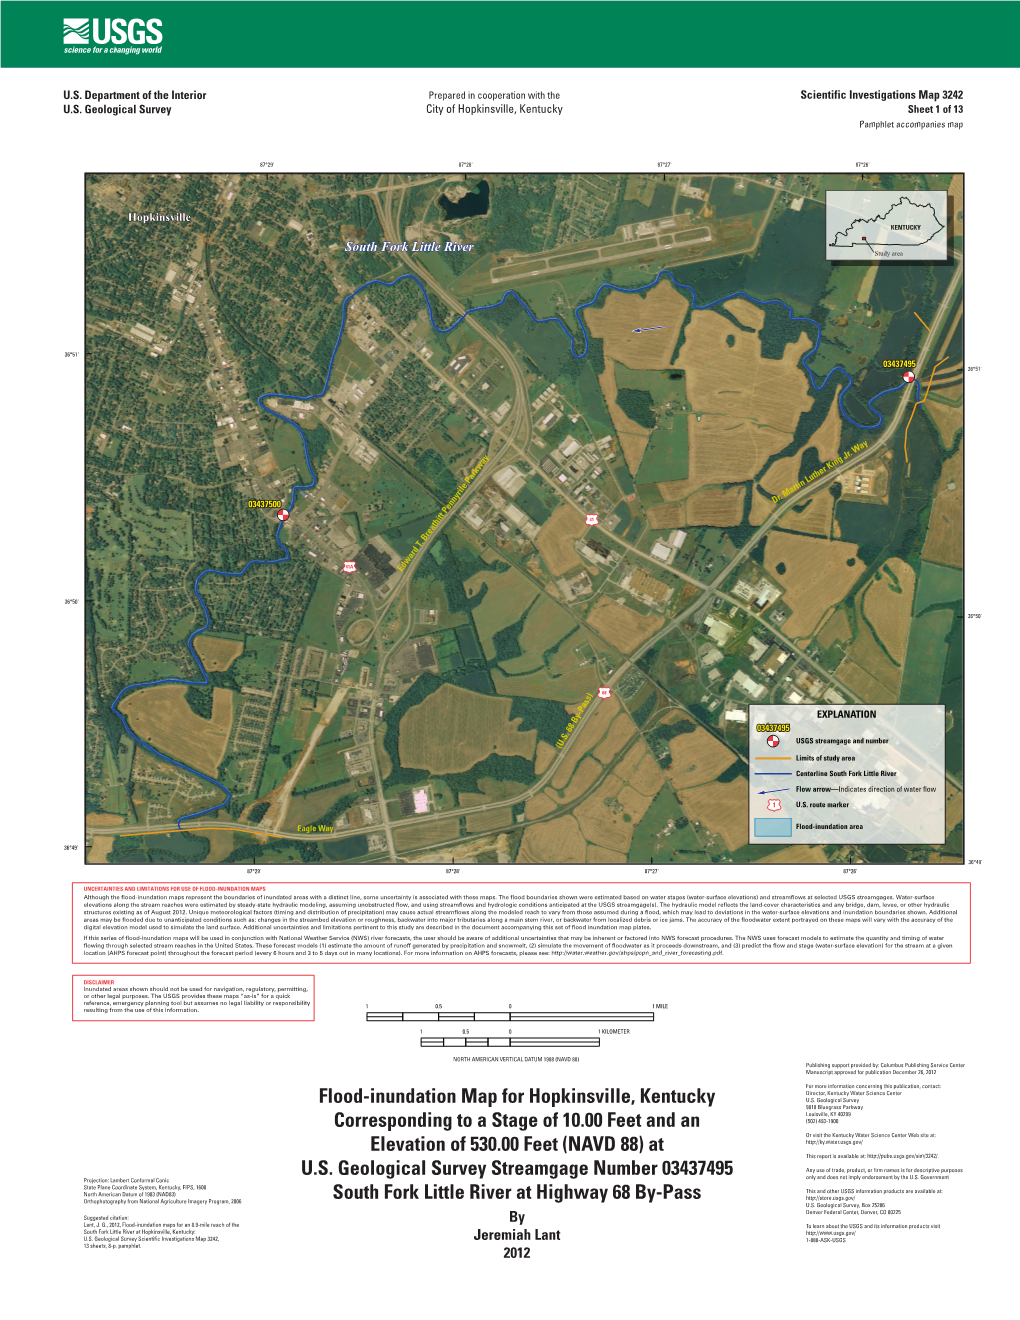 Flood-Inundation Map for Hopkinsville, Kentucky Corresponding to A